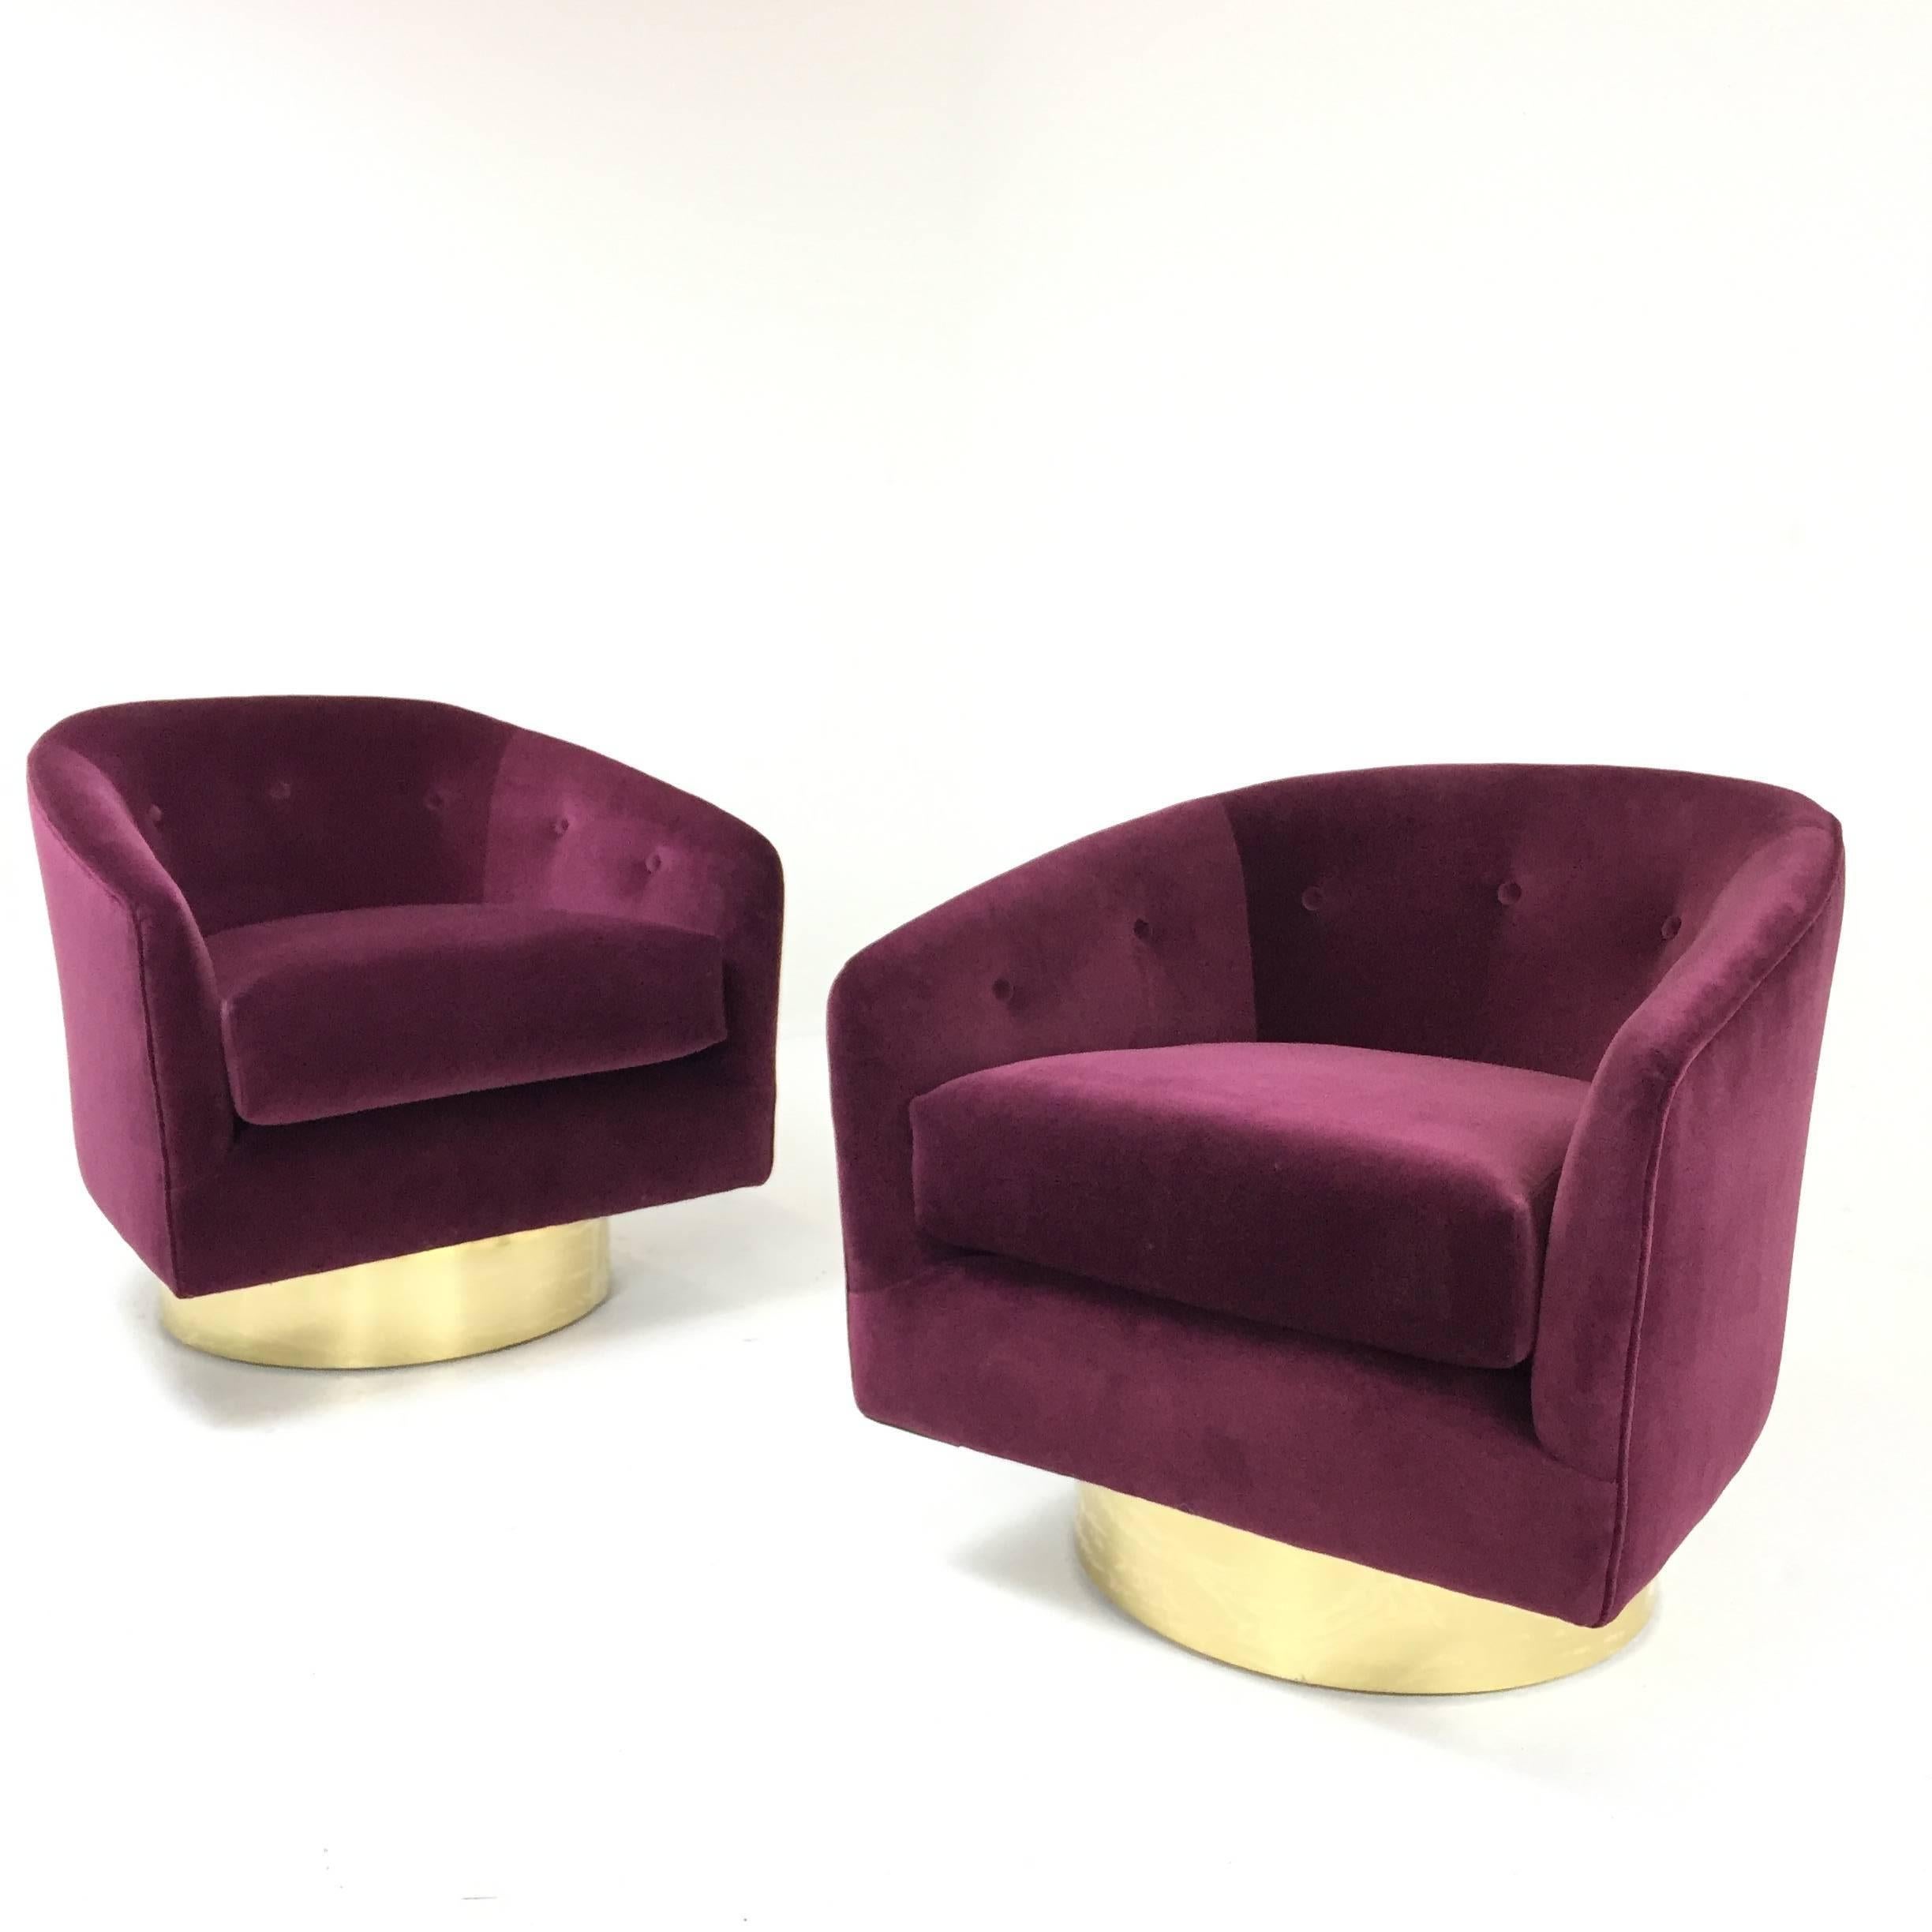 Milo Baughman swivel chairs reupholstered with gorgeous merlot velvet and our custom brass plinths. The brass can be 